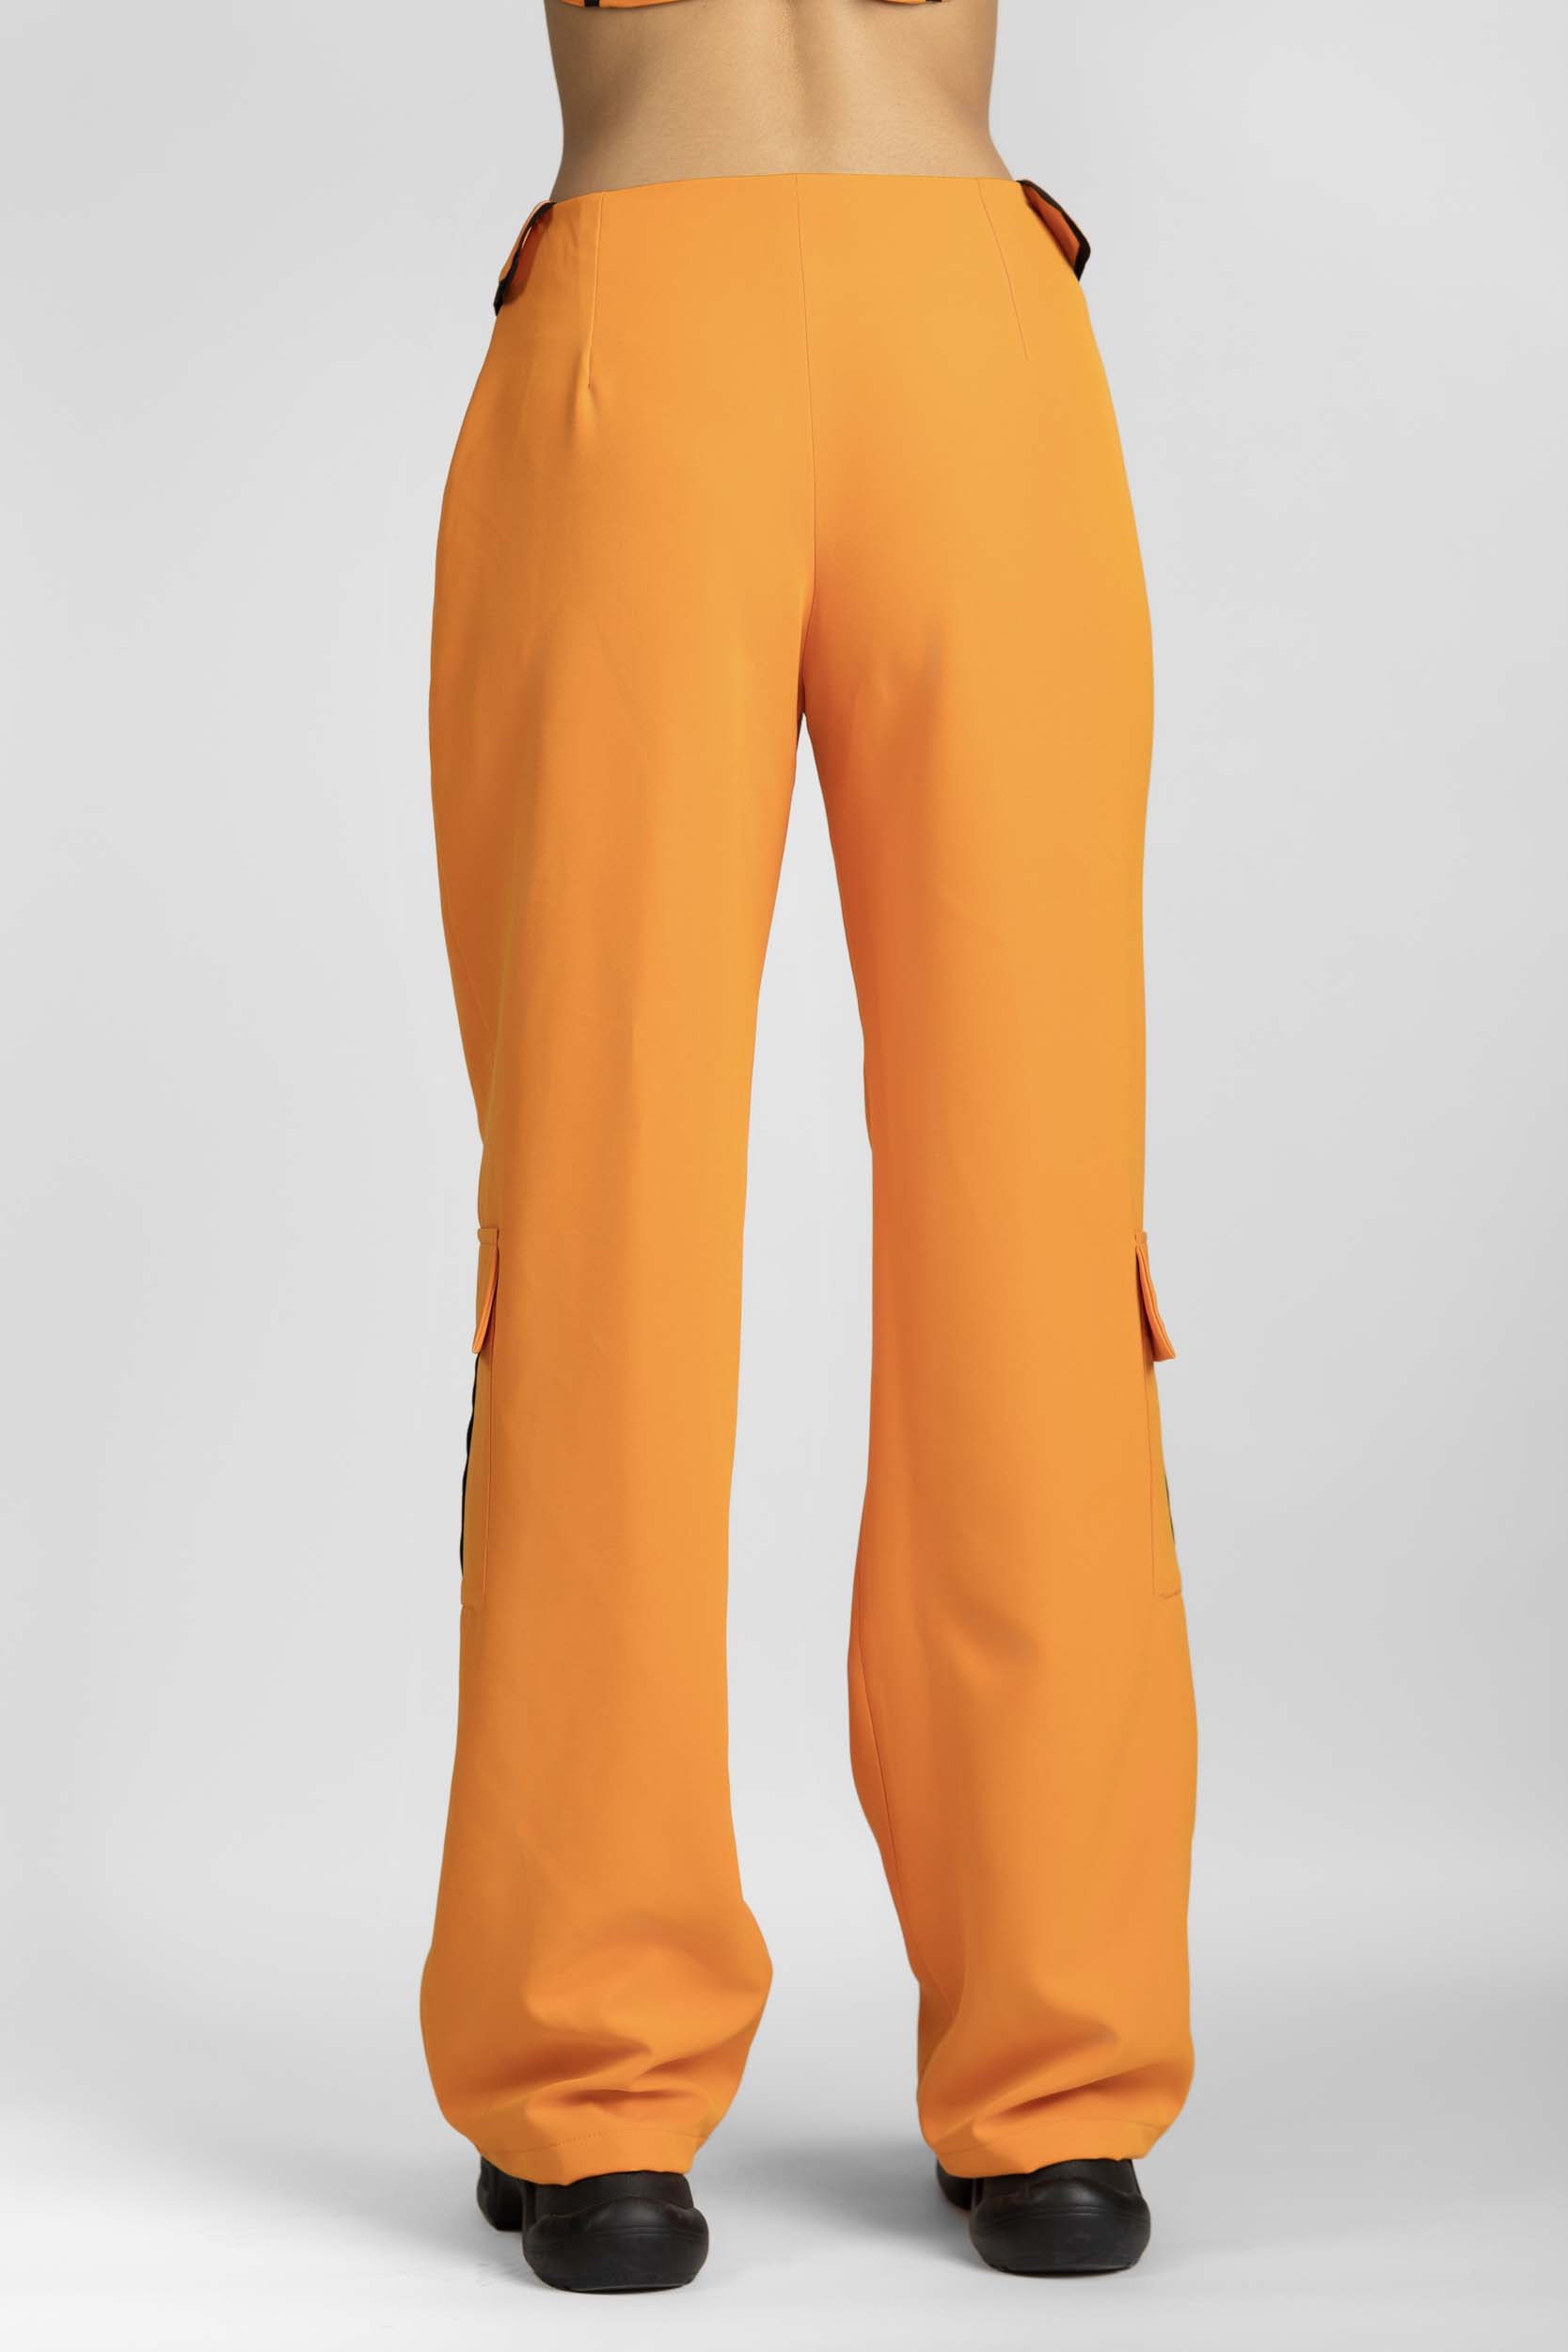 Orange Straight leg pants, with dtripe details, collar on the waist and zipper, back photo.